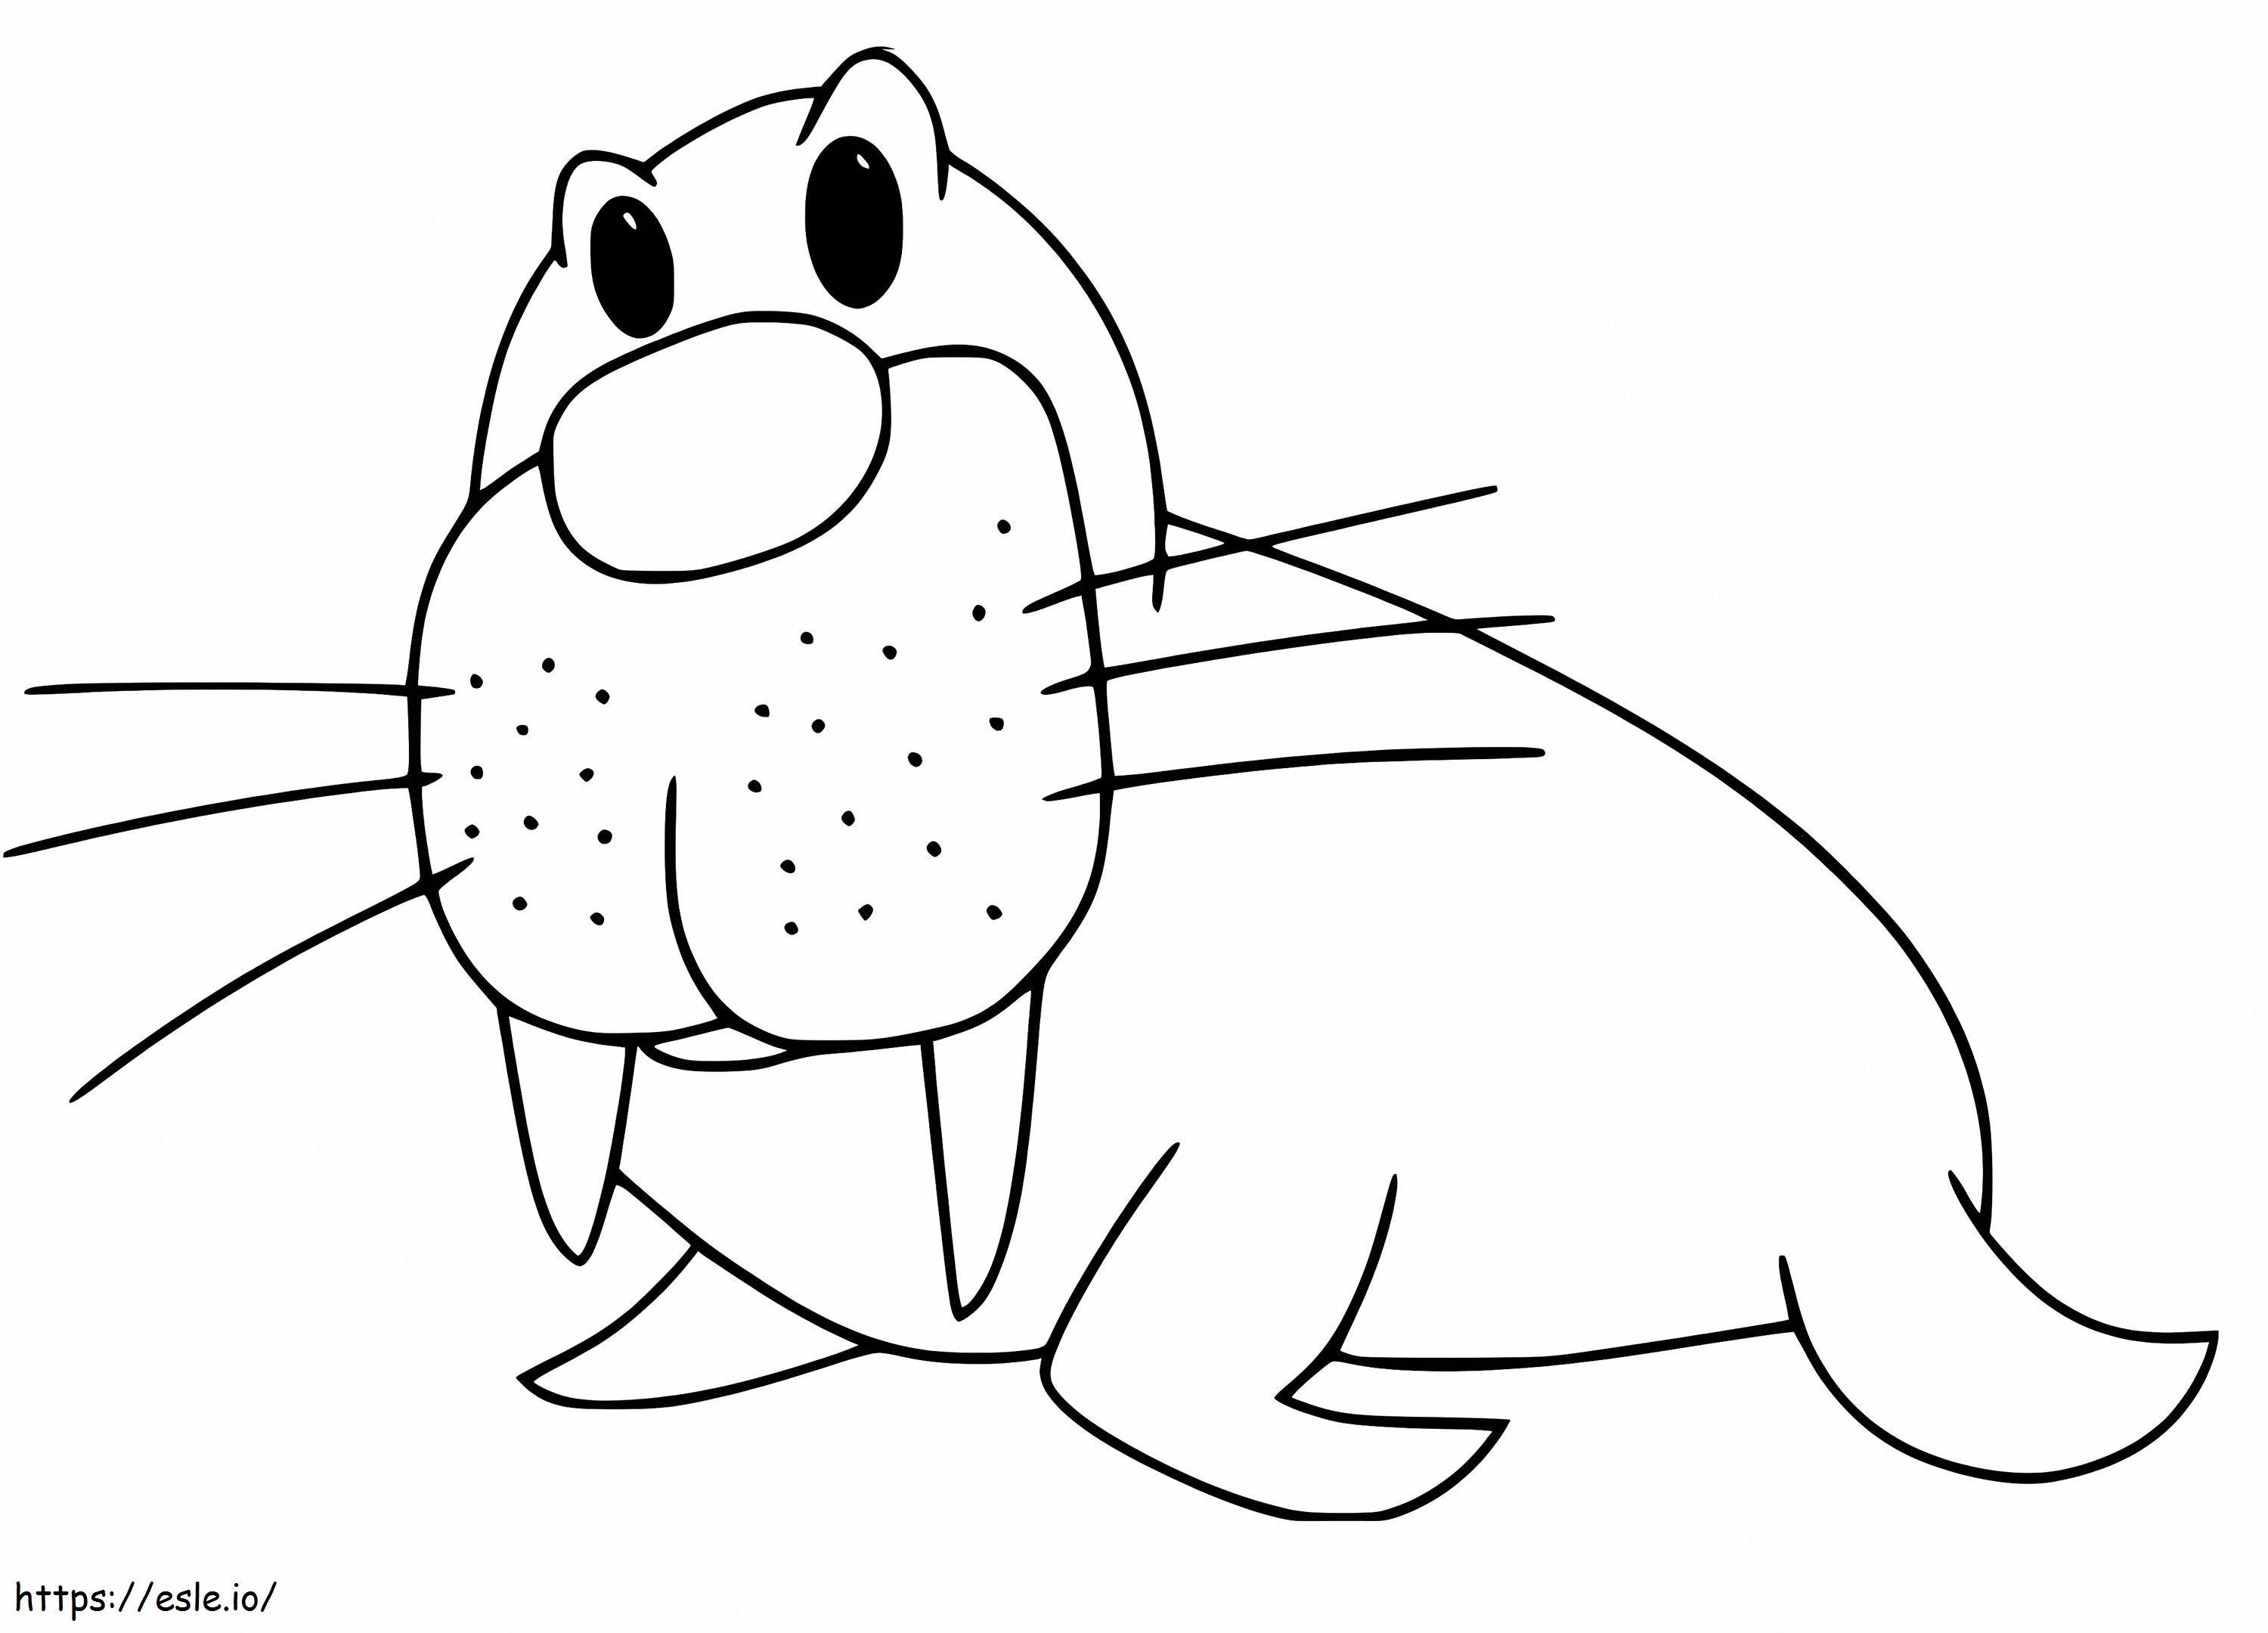 Walrus 8 coloring page